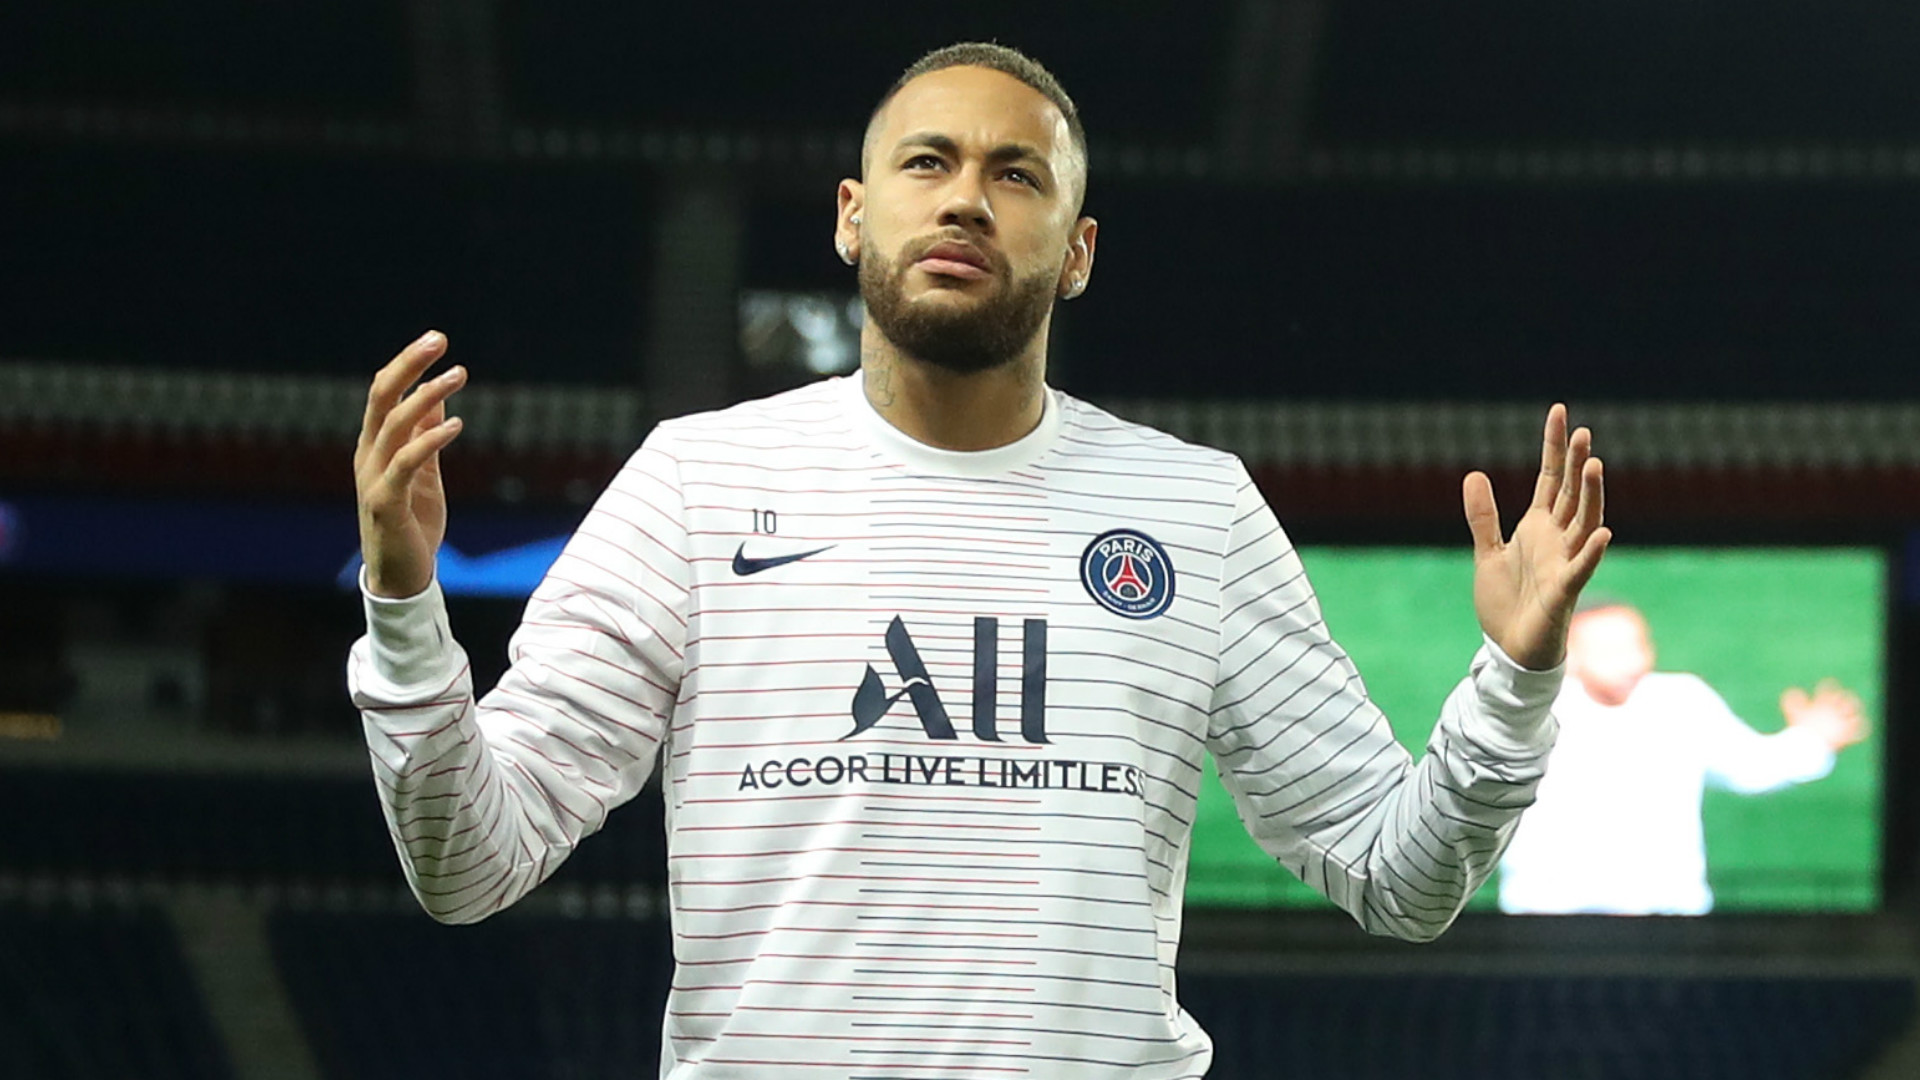 'Neymar needs to question himself & grow up' - PSG star is 'just doing what life taught him to do', says Juninho